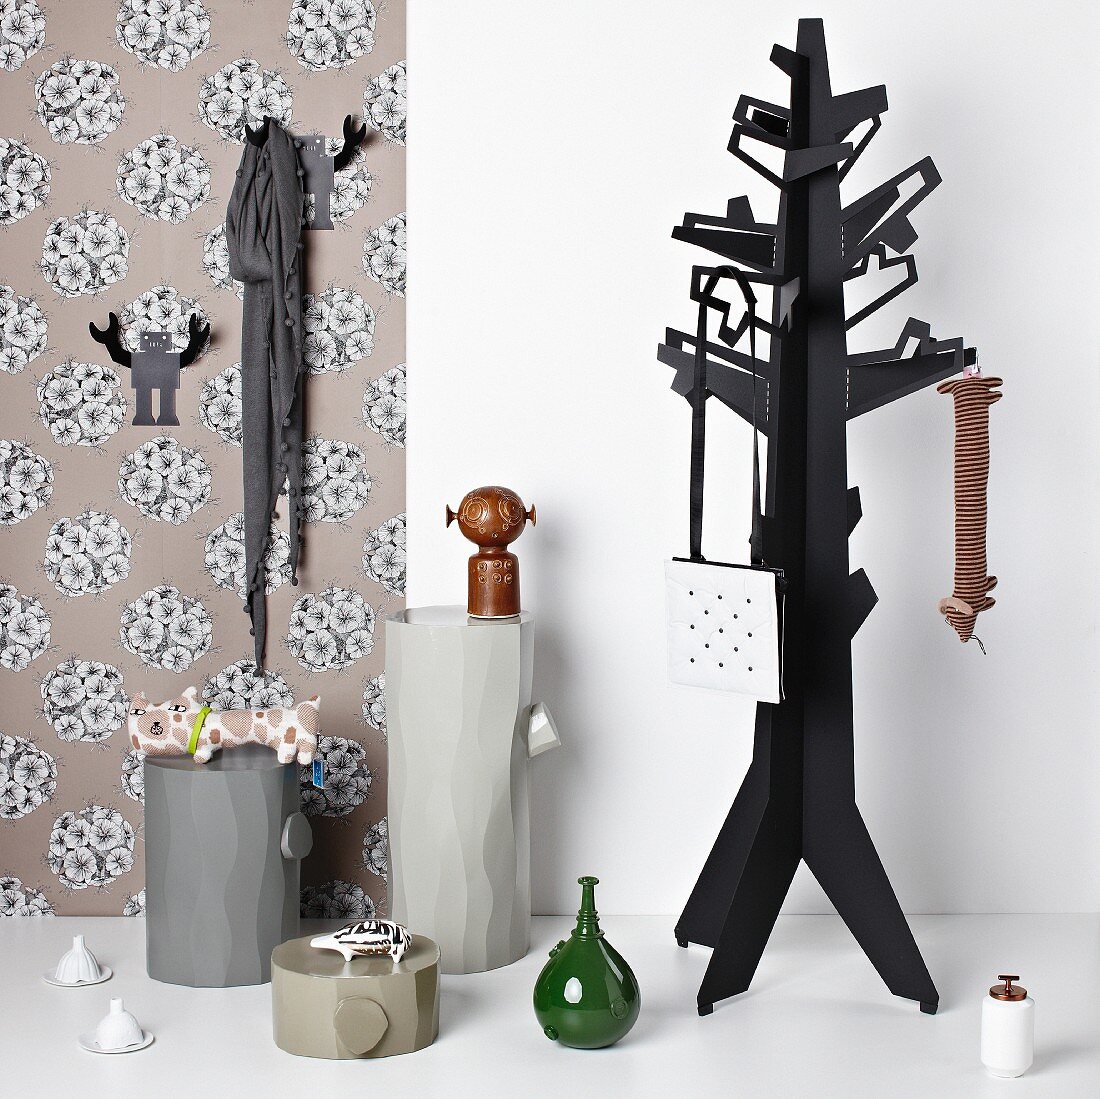 Coat stand and objets d'art on plinths against strip of floral wallpaper